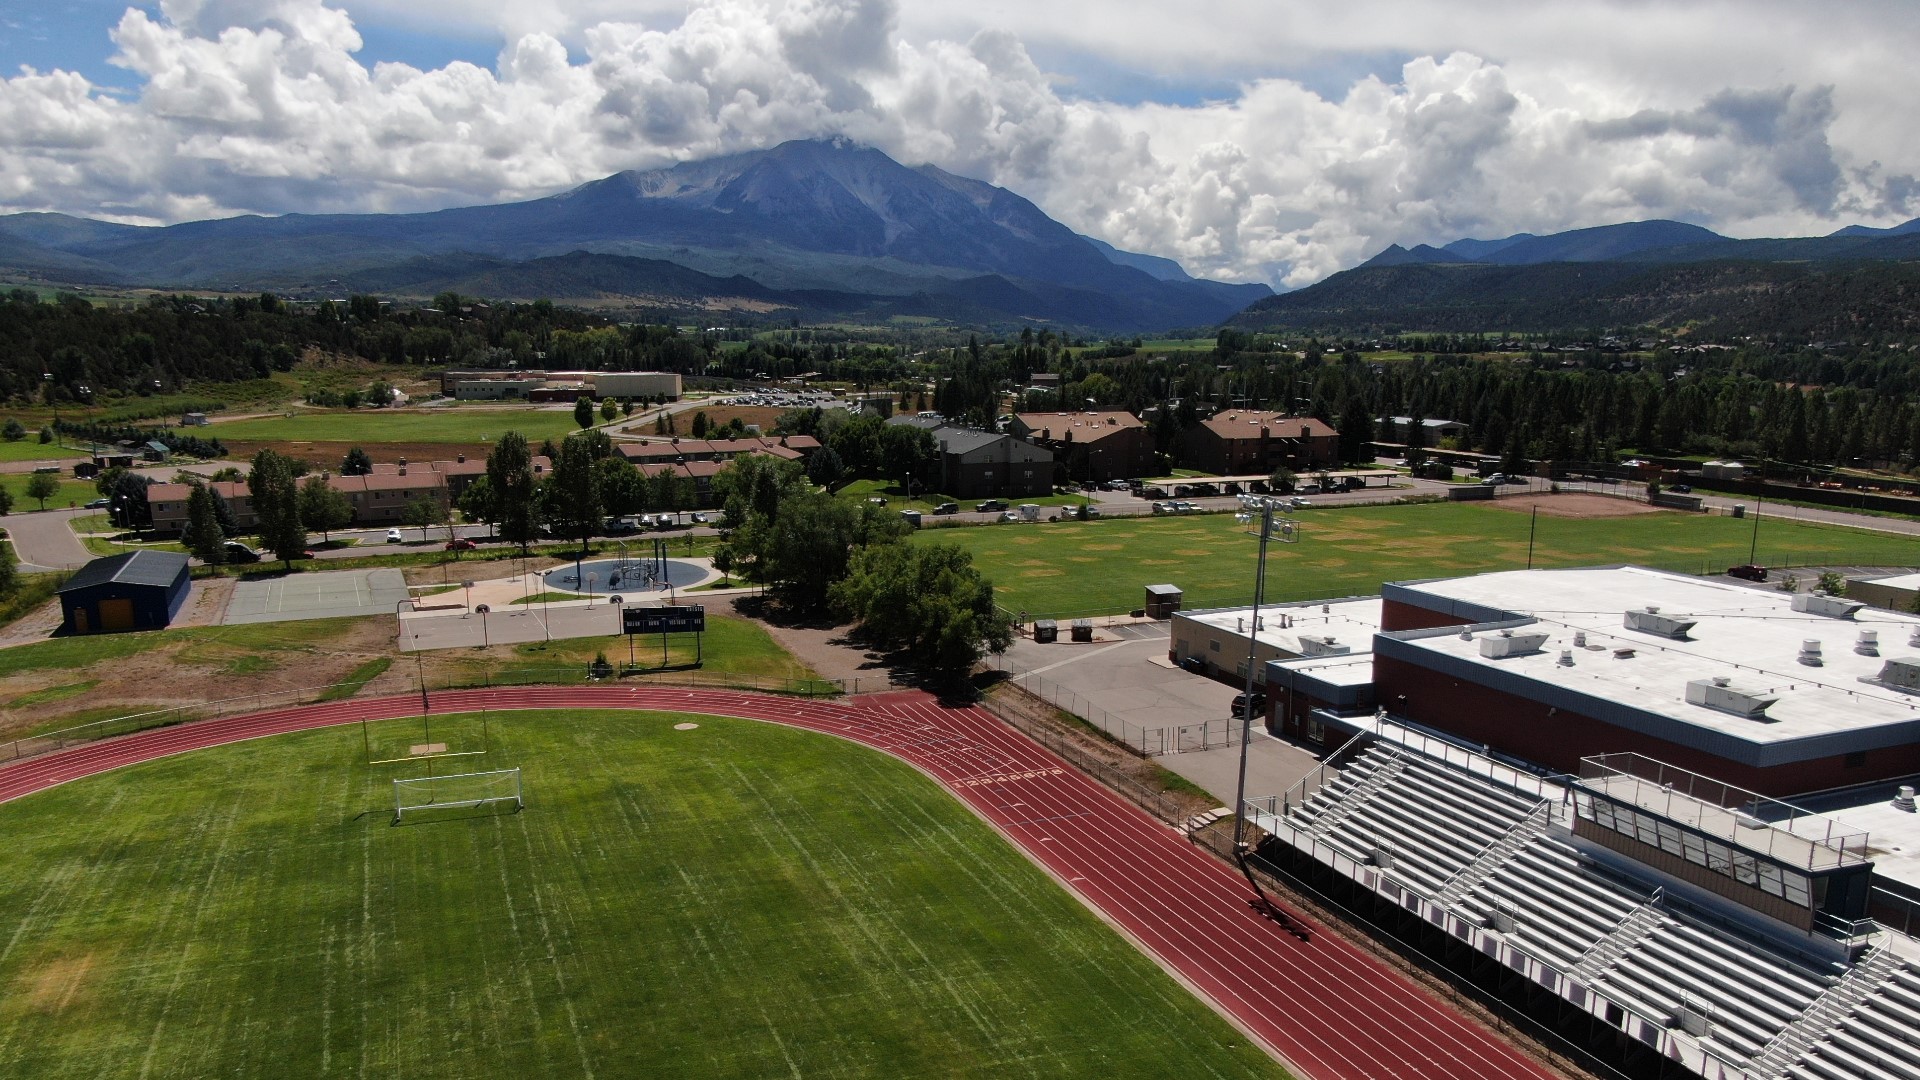 The Roaring Fork Rams have a scenic home with Mount Sopris in the background.